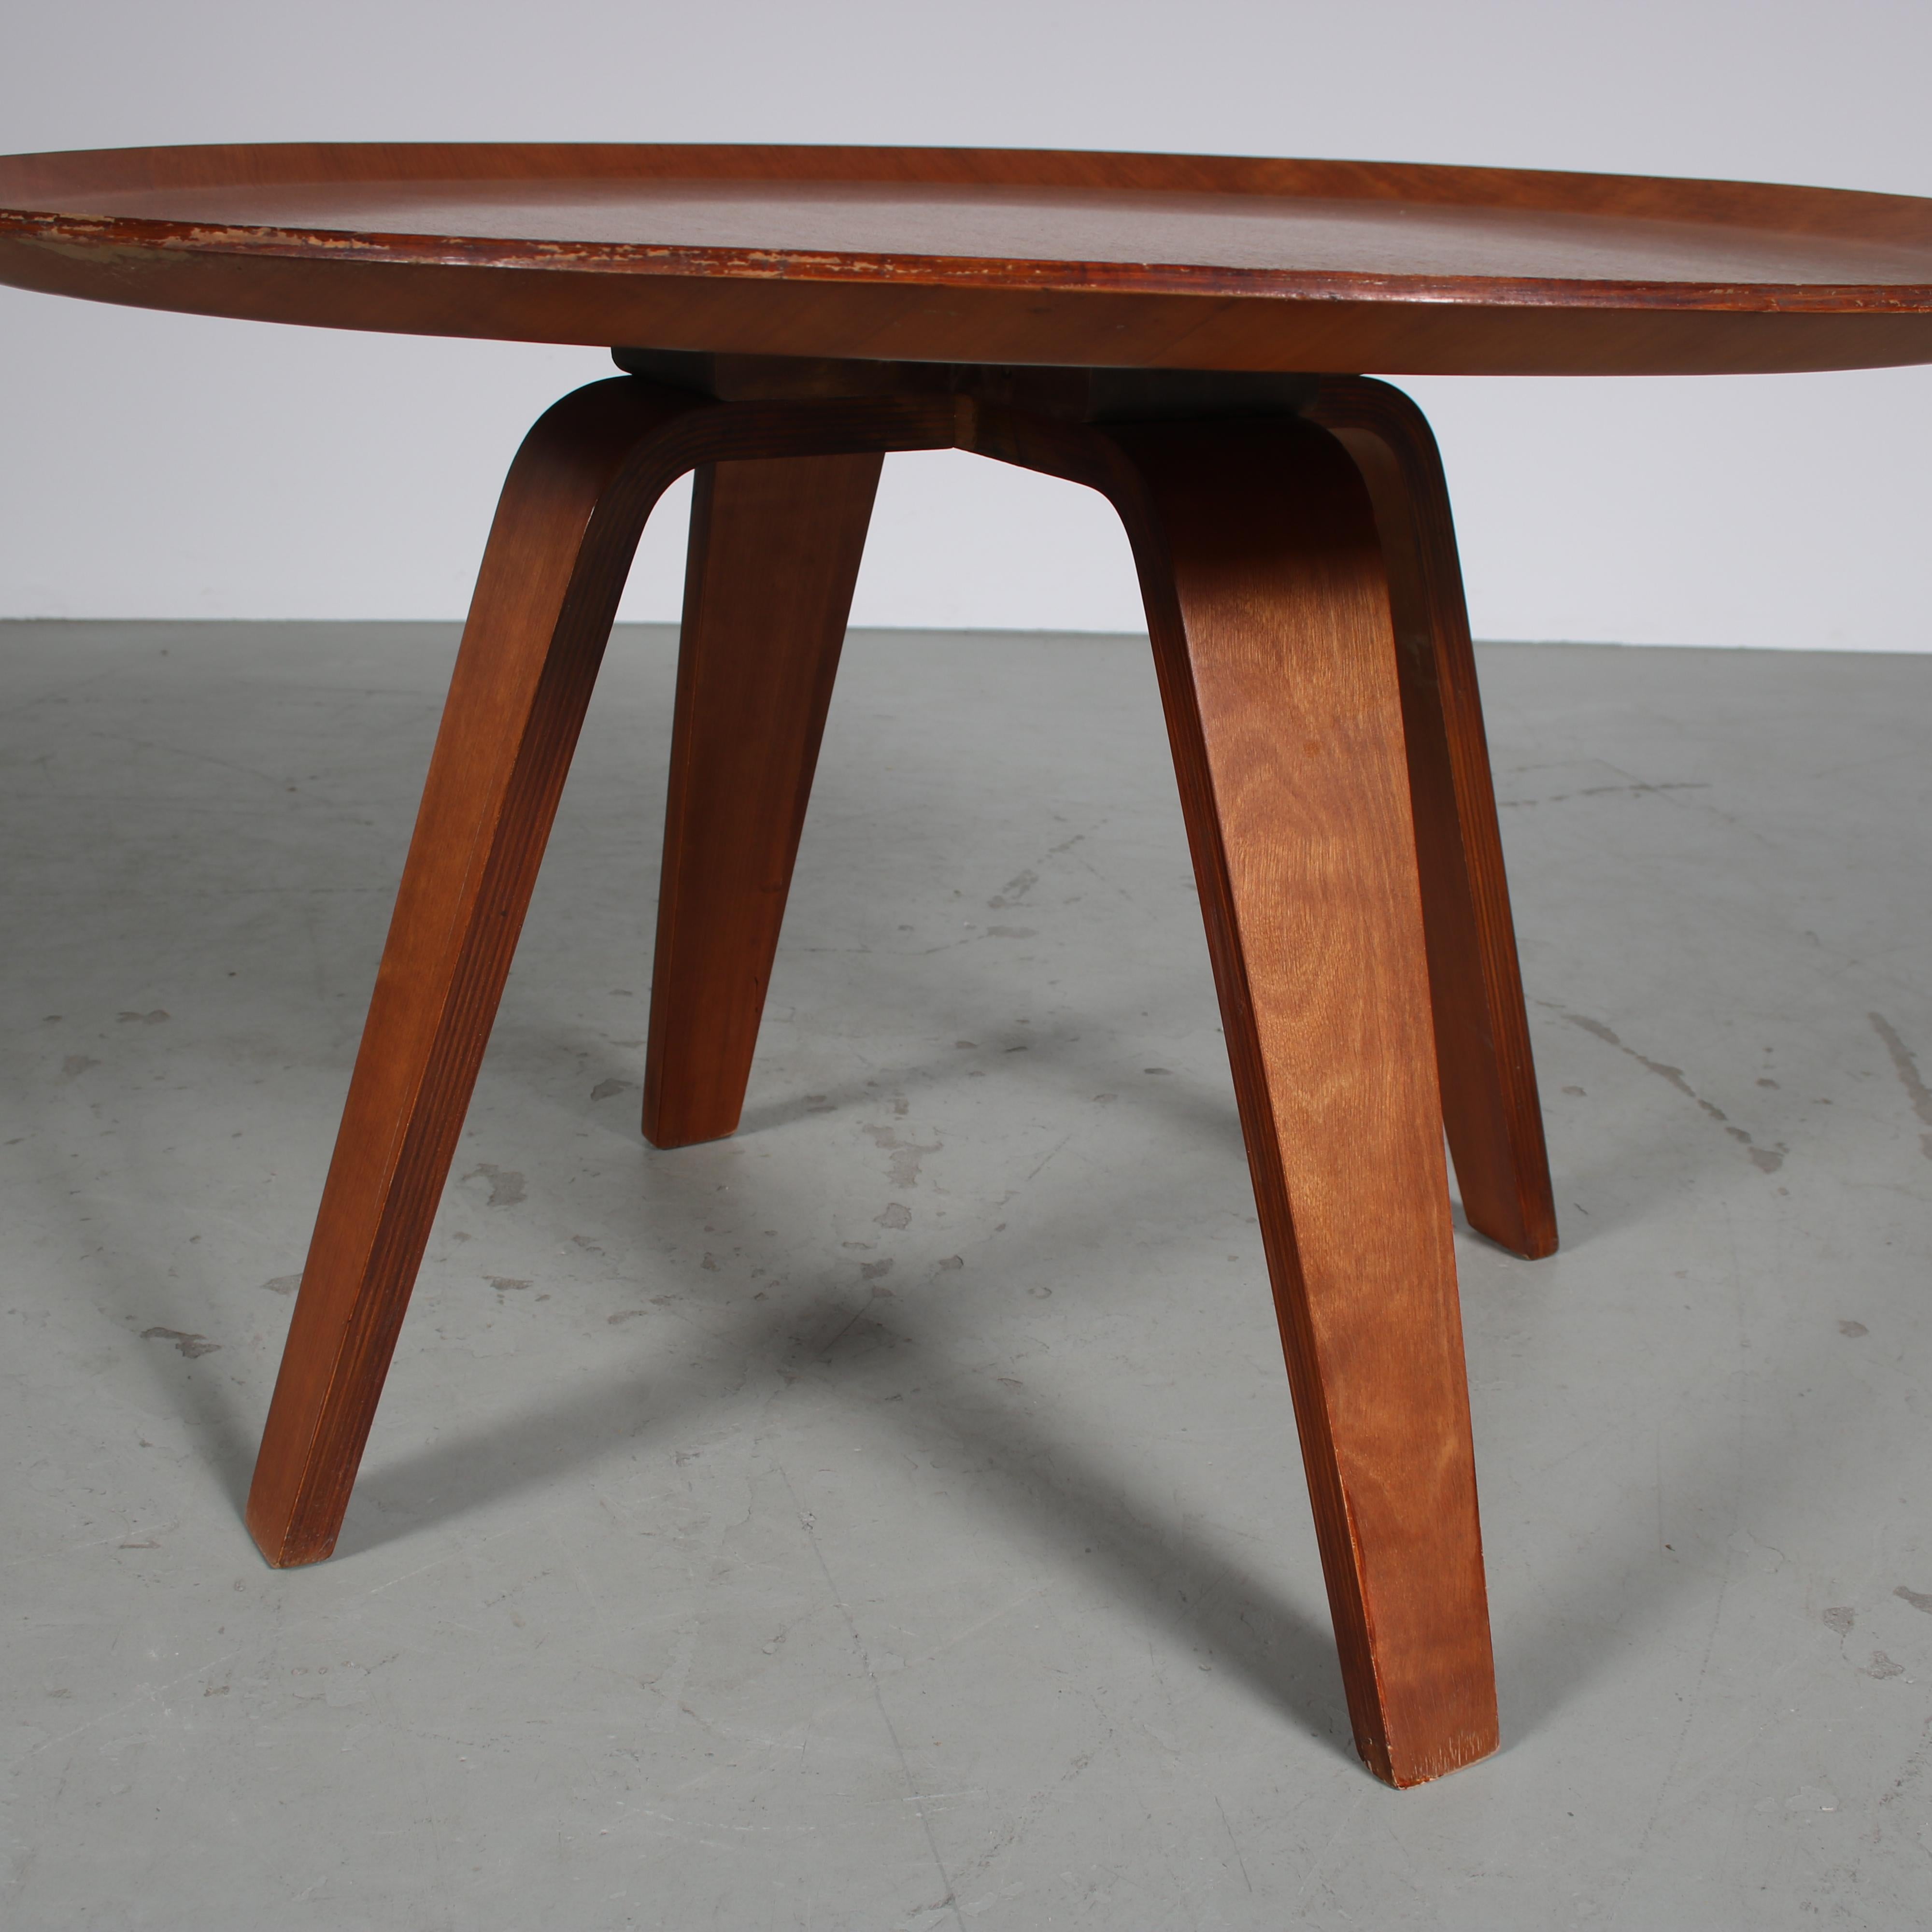 Cor Alons Coffee Table for De Boer Gouda, Netherlands 1950 For Sale 3